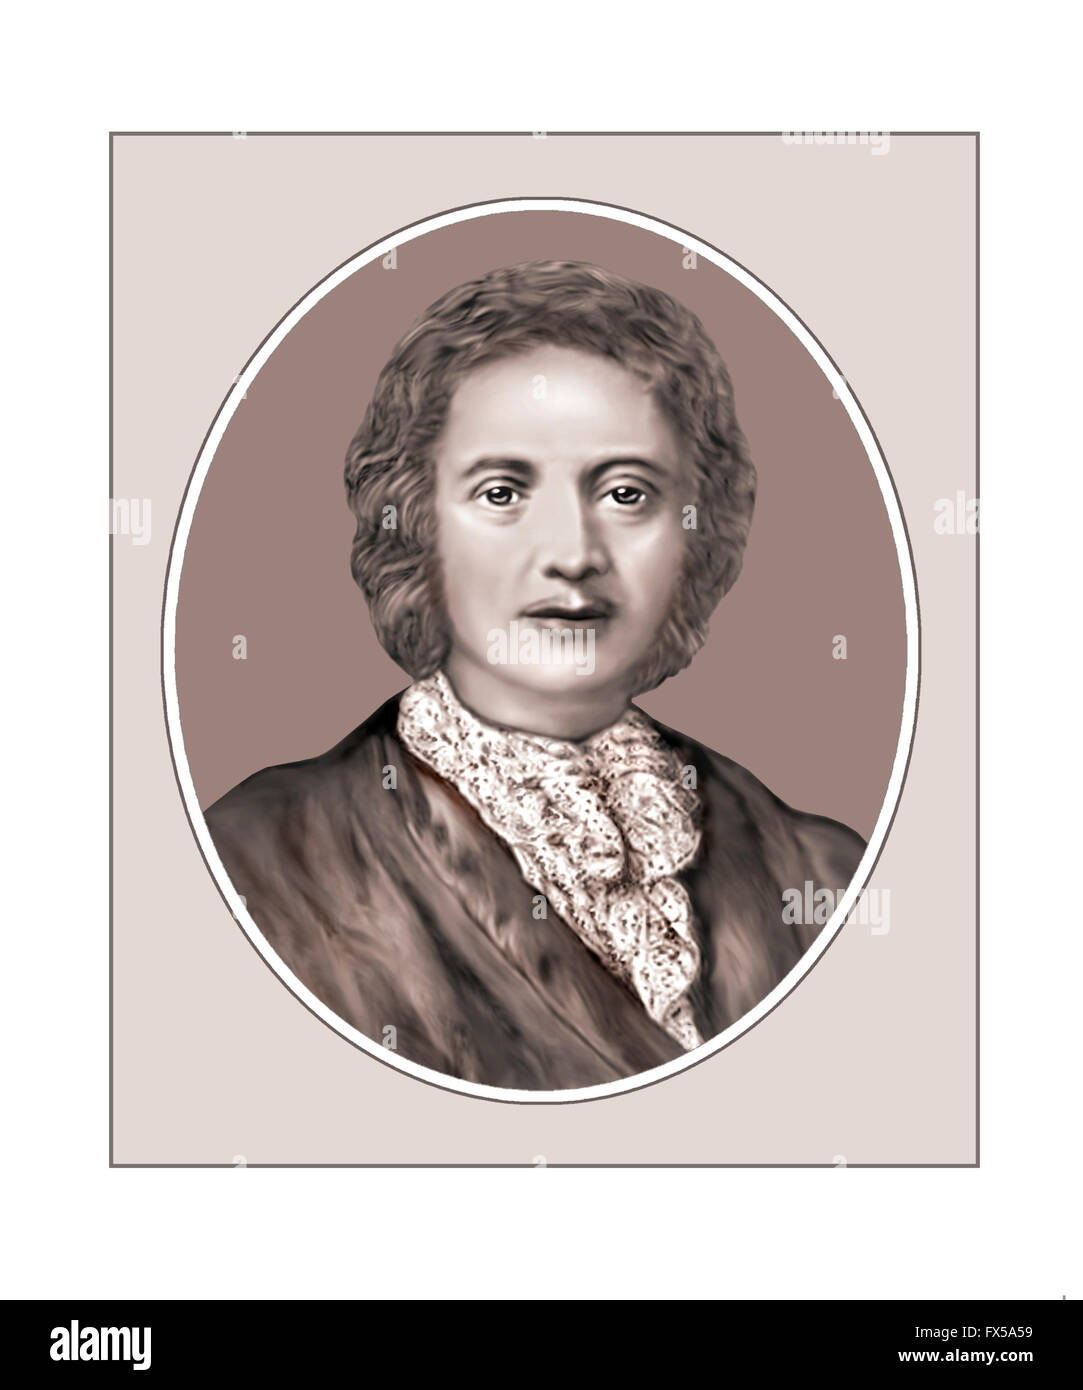 Francois Couperin, 1668-1733, Composer, Organist Stock Photo